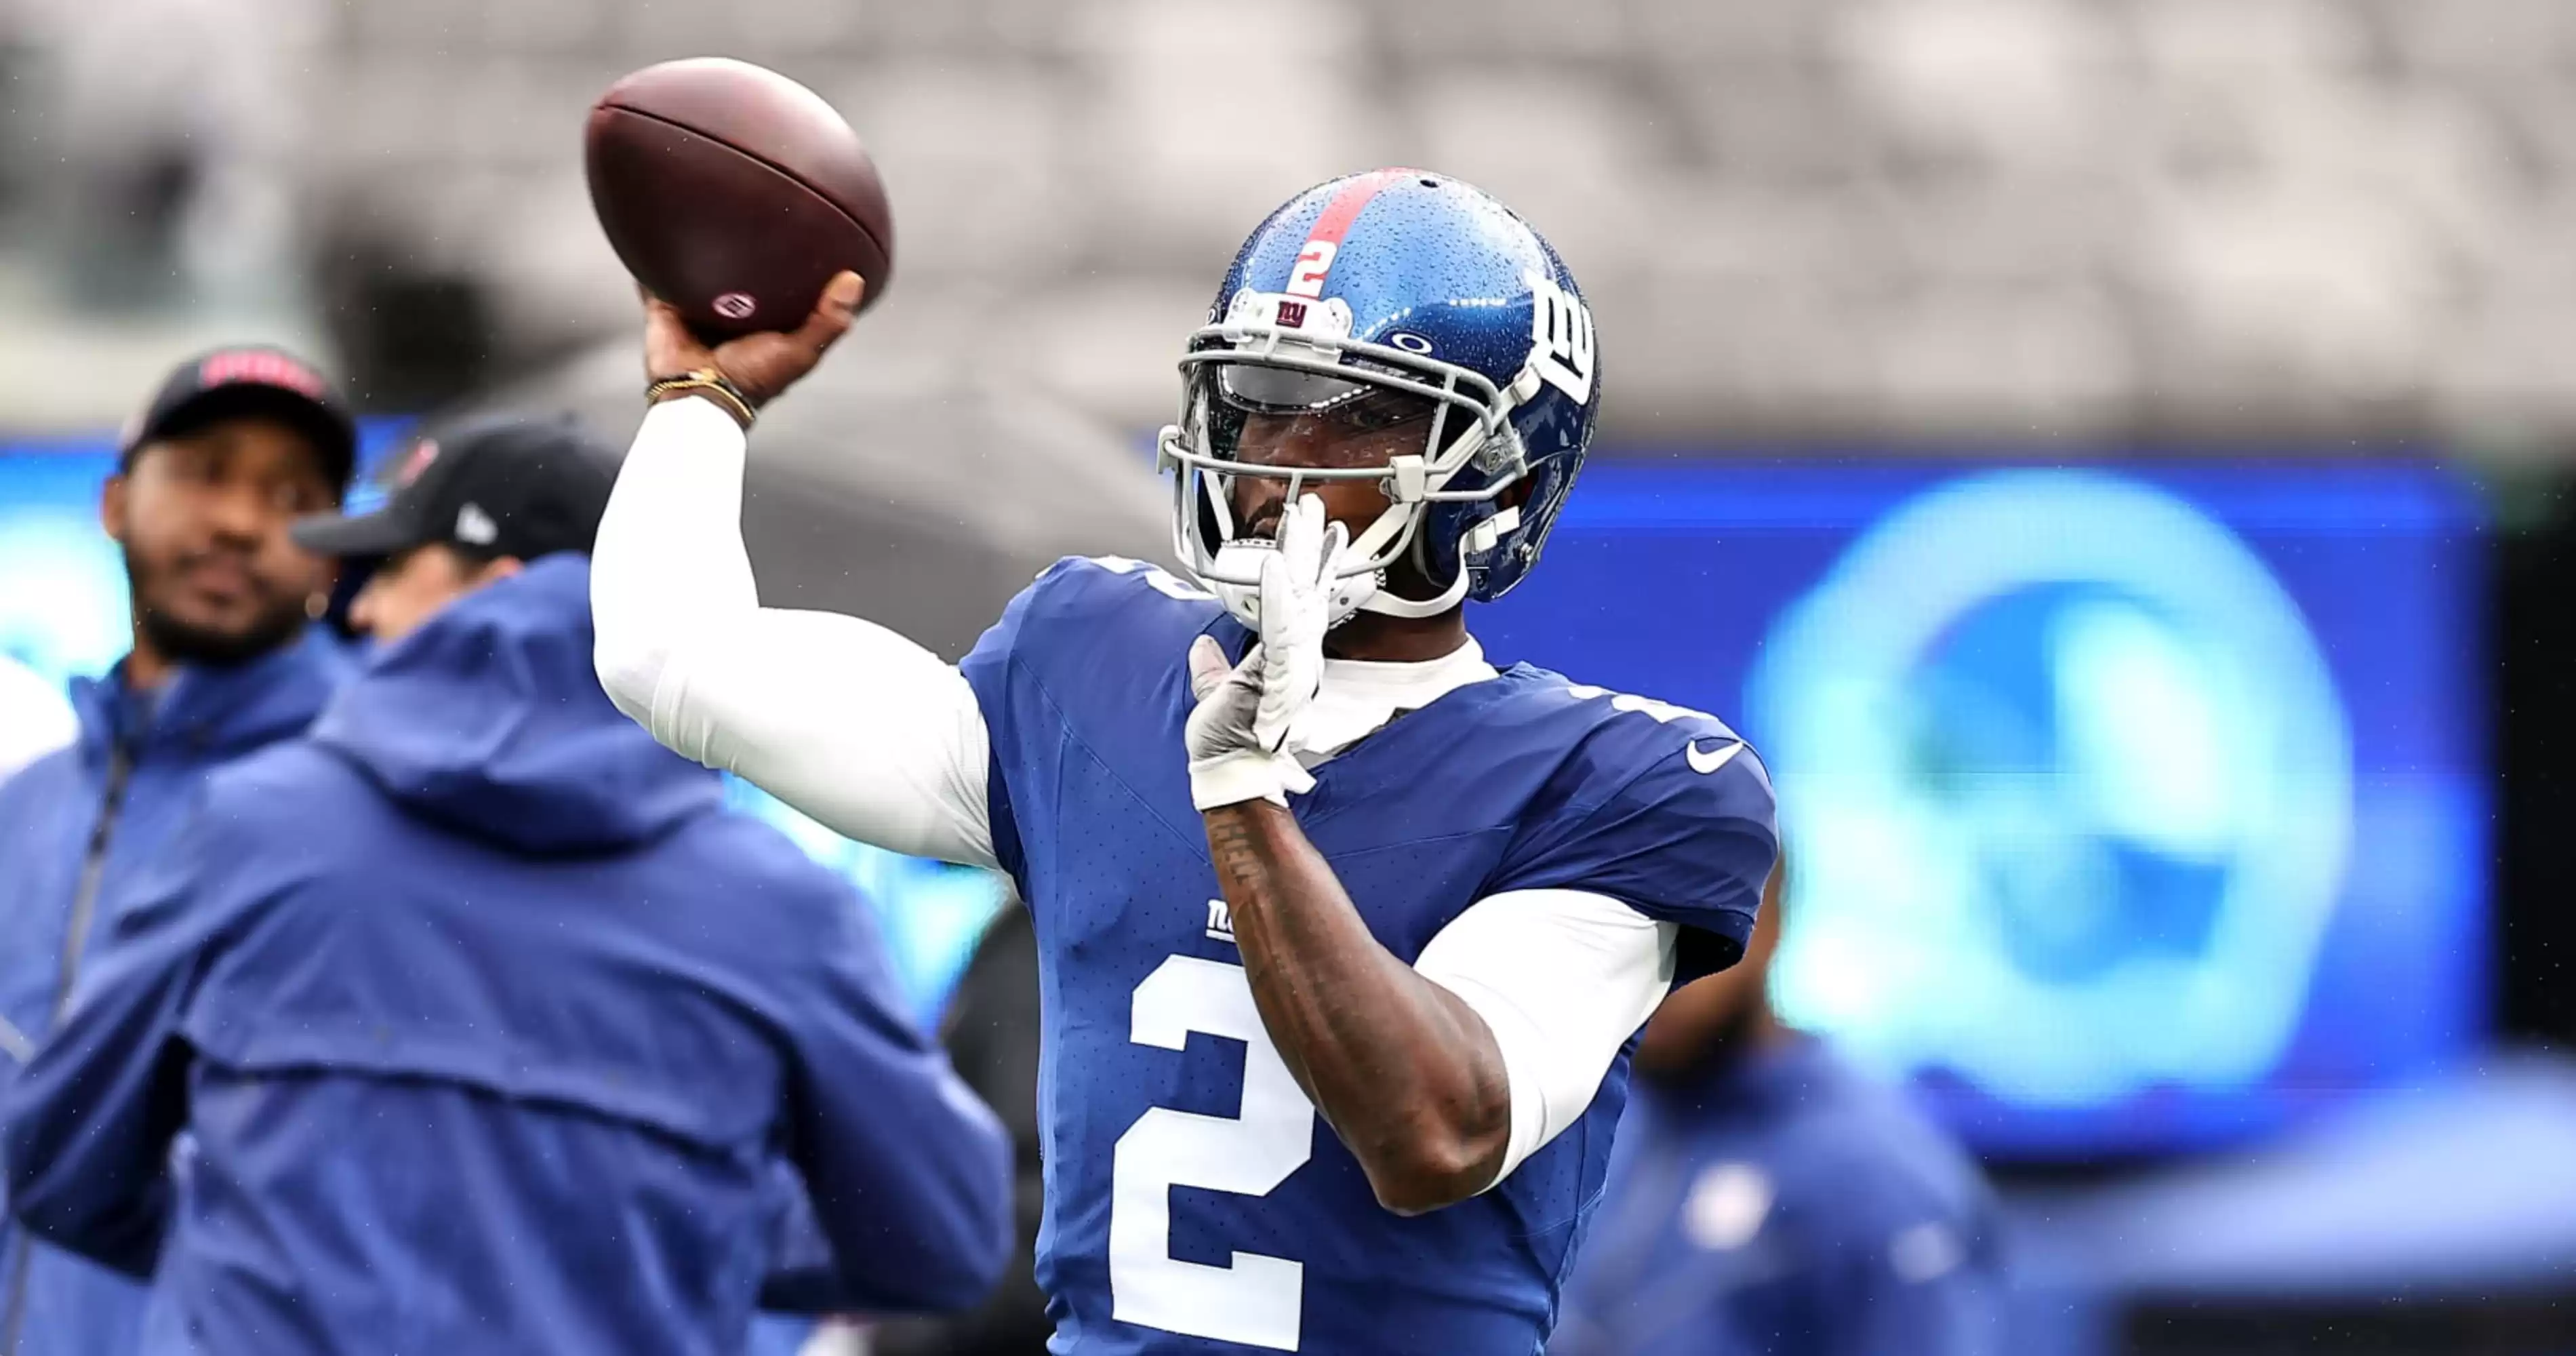 "Giants Tyrod Taylor Discharged from Hospital After Rib Injury vs Jets"